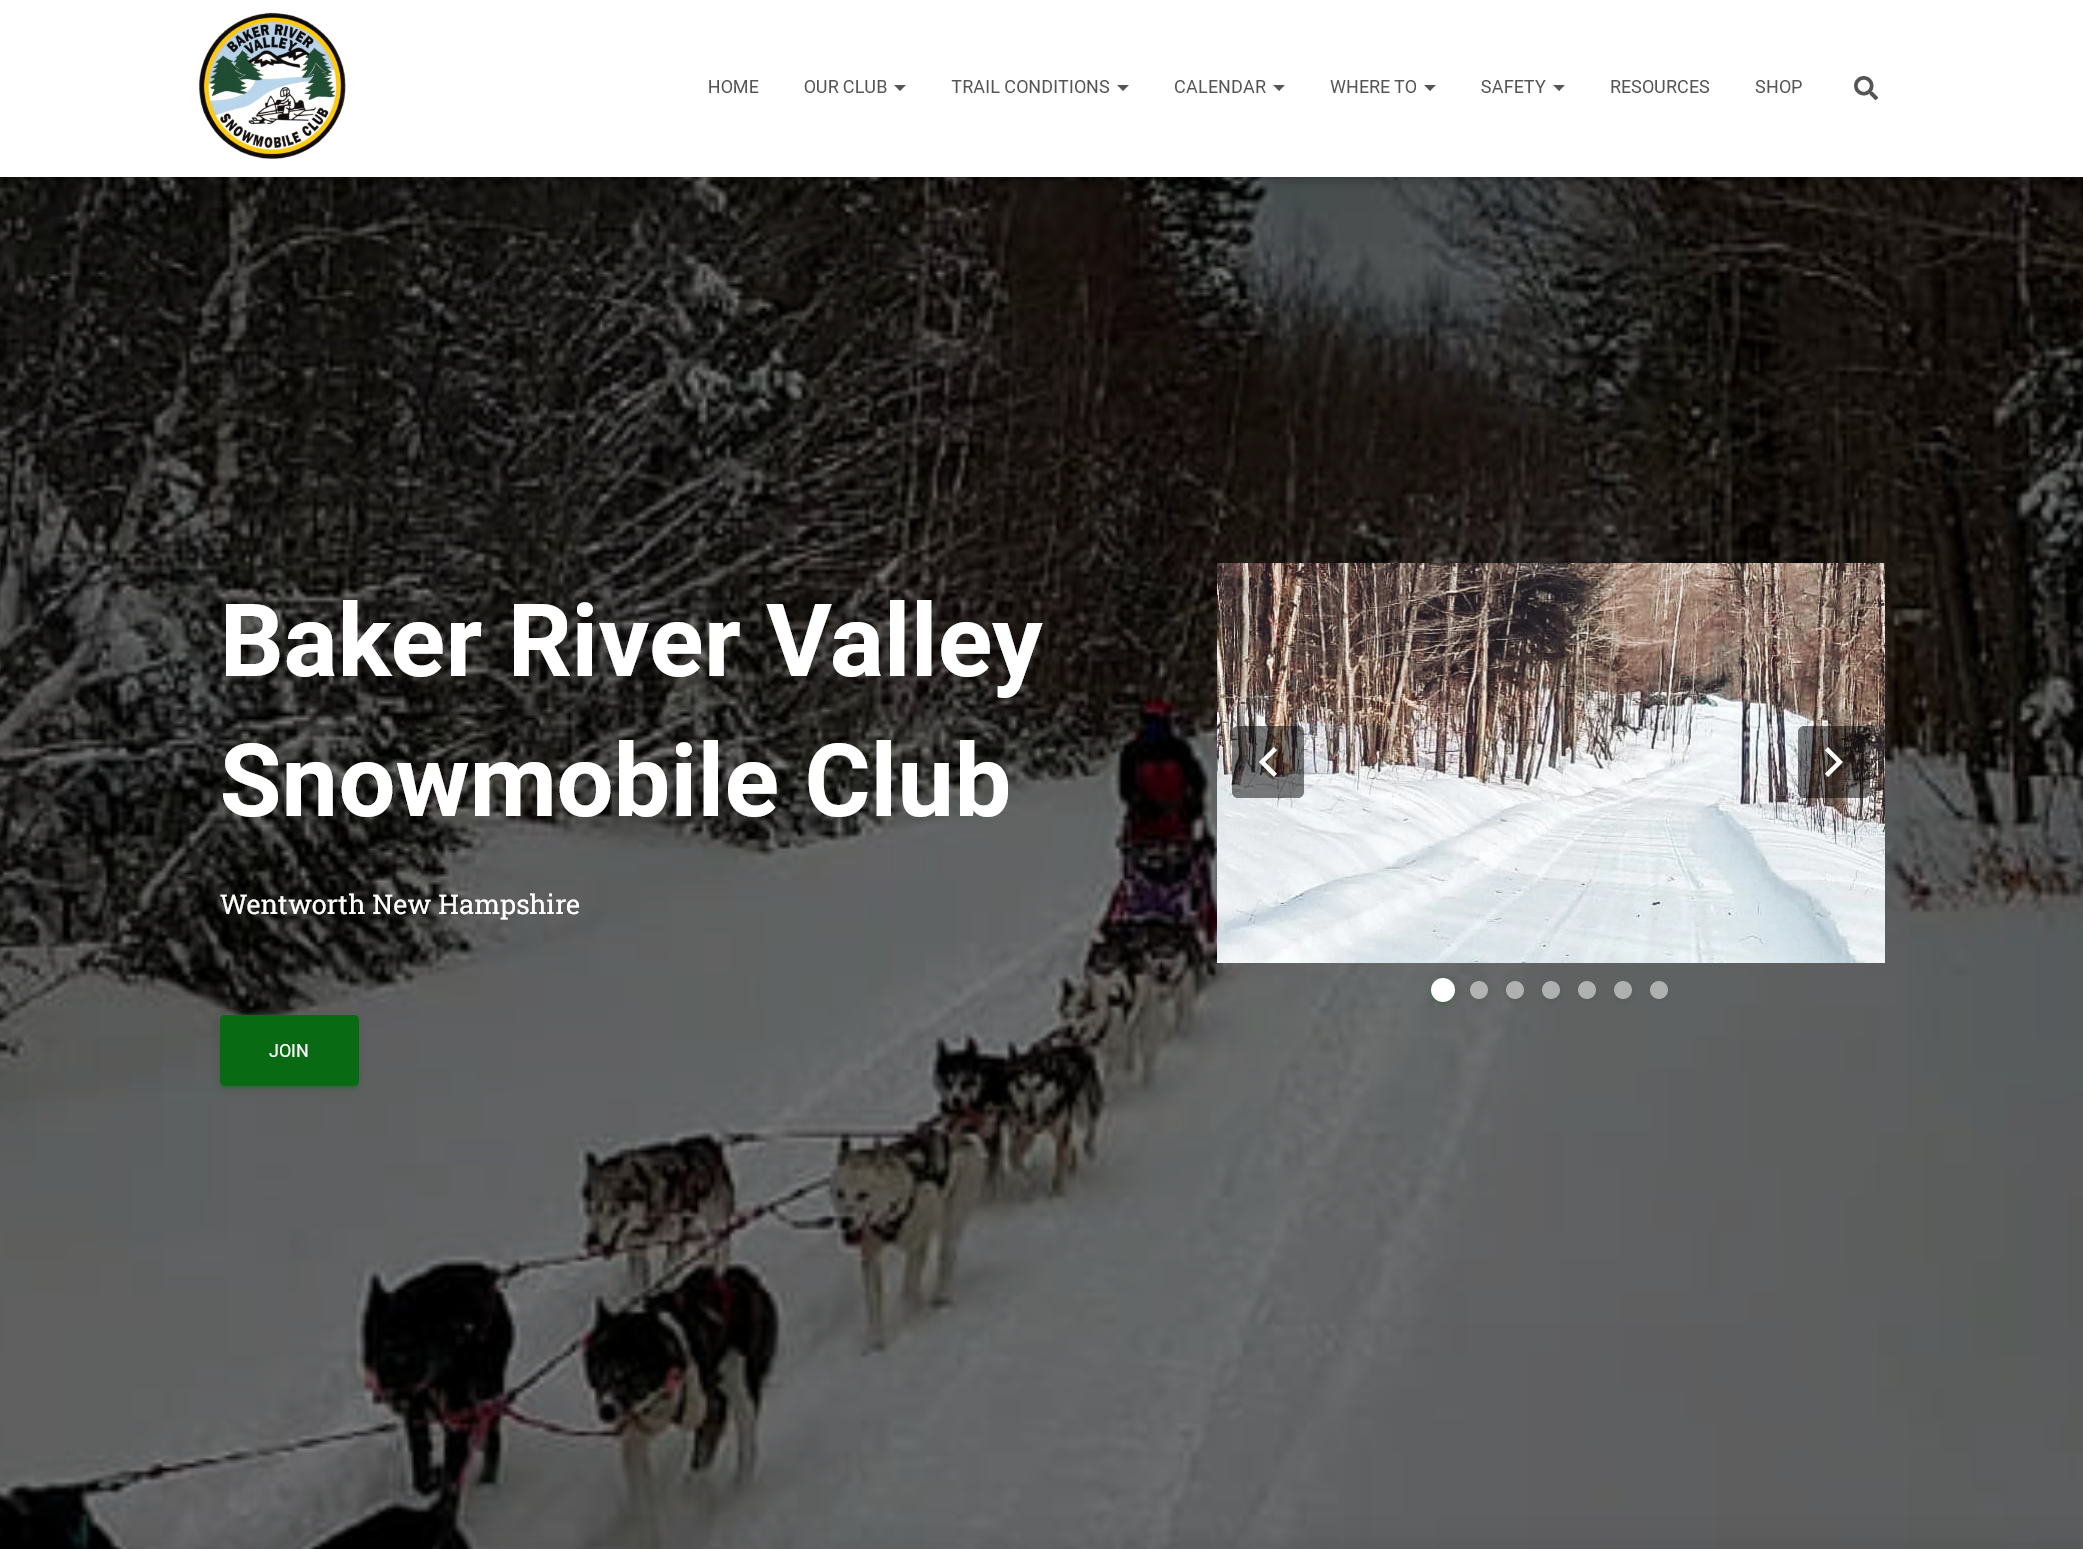 Baker River Valley Snowmobile Club